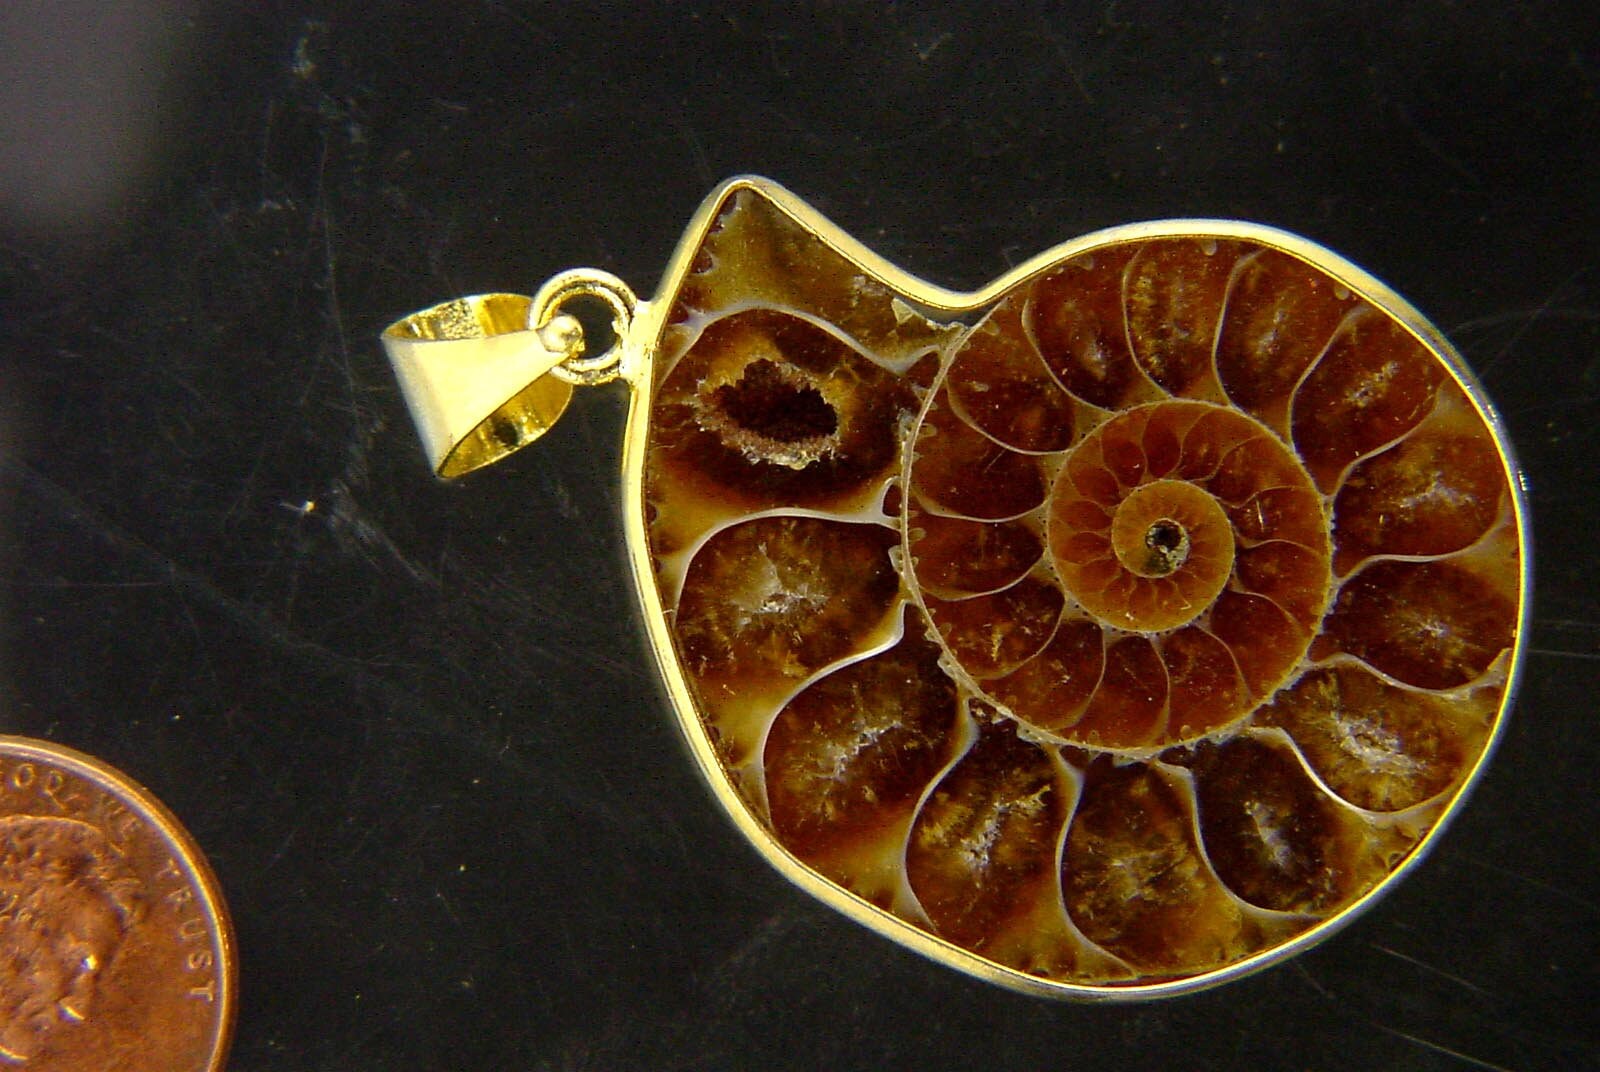 Gold Plated Ammonite Nautiloid Fossil Pendant Necklace Jewelry With 24 Gp Chain 7255P